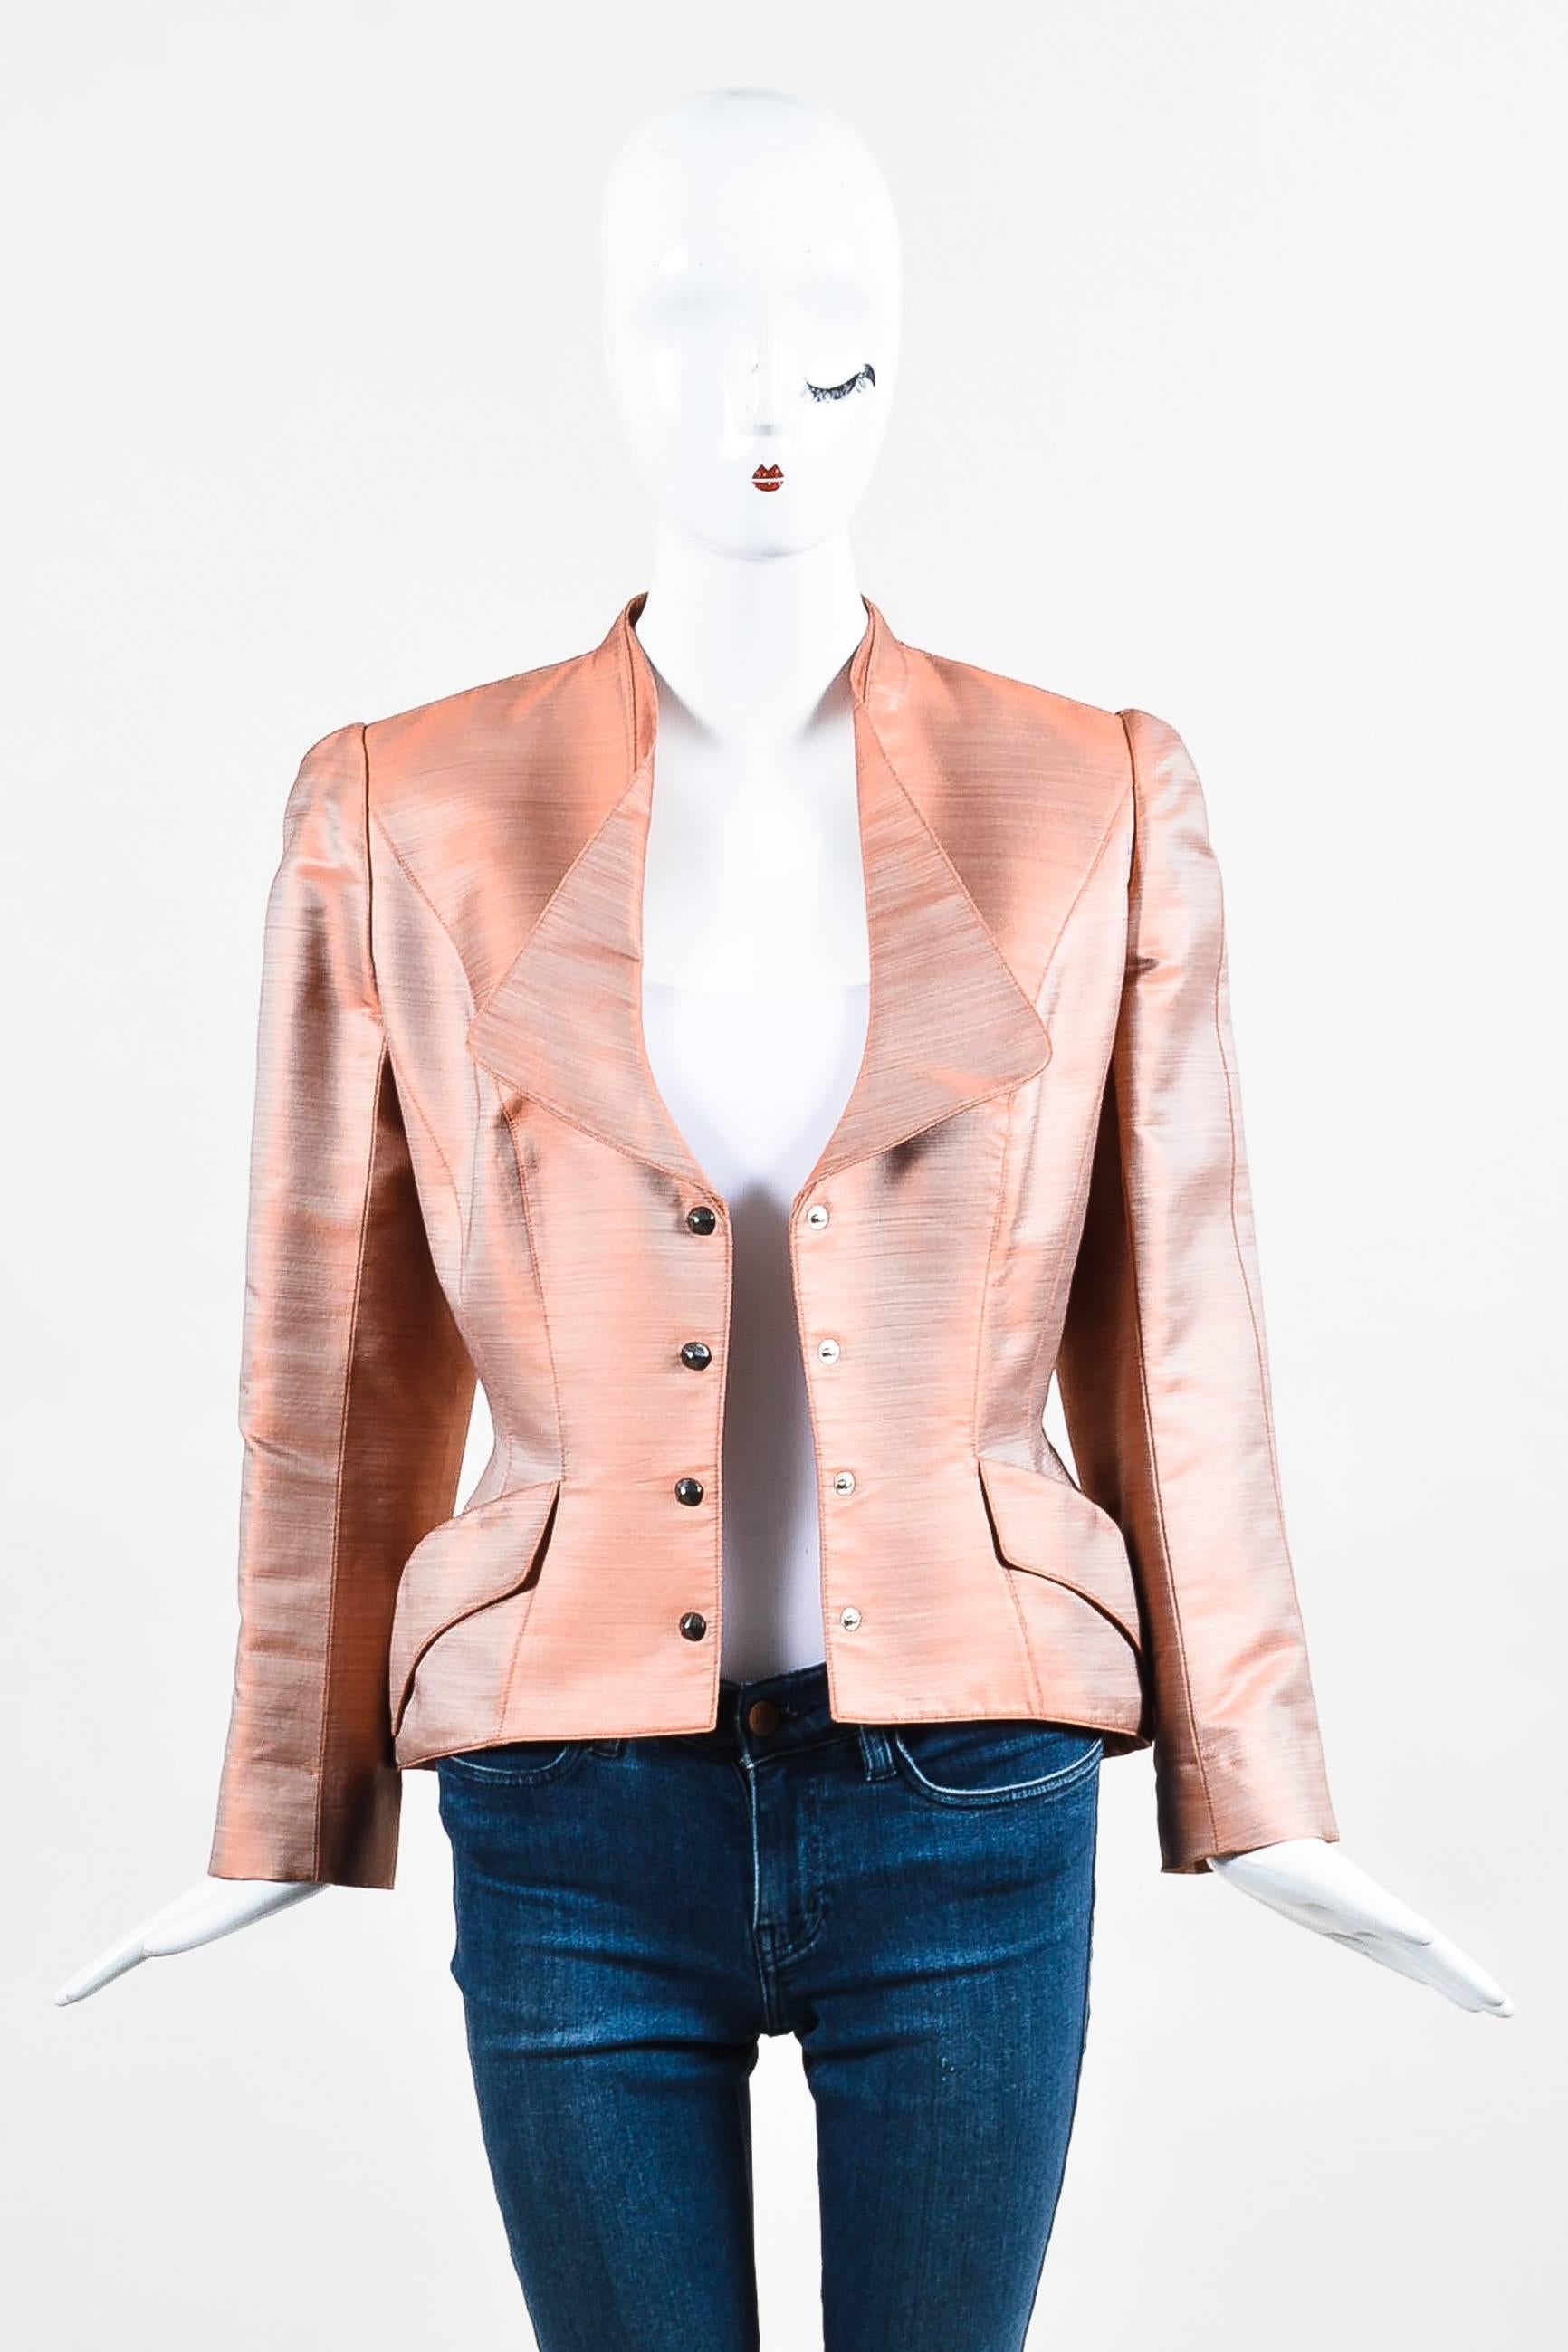 Parisian-chic blazer featuring structured shoulders, round pyramid stud snap-buttons down the center front, a high-low, peplum hem, diagonal flap pockets, and an ornamental collar. Lined.

Size:	
44 (FR)
12 (US)	

Additional Measurements: